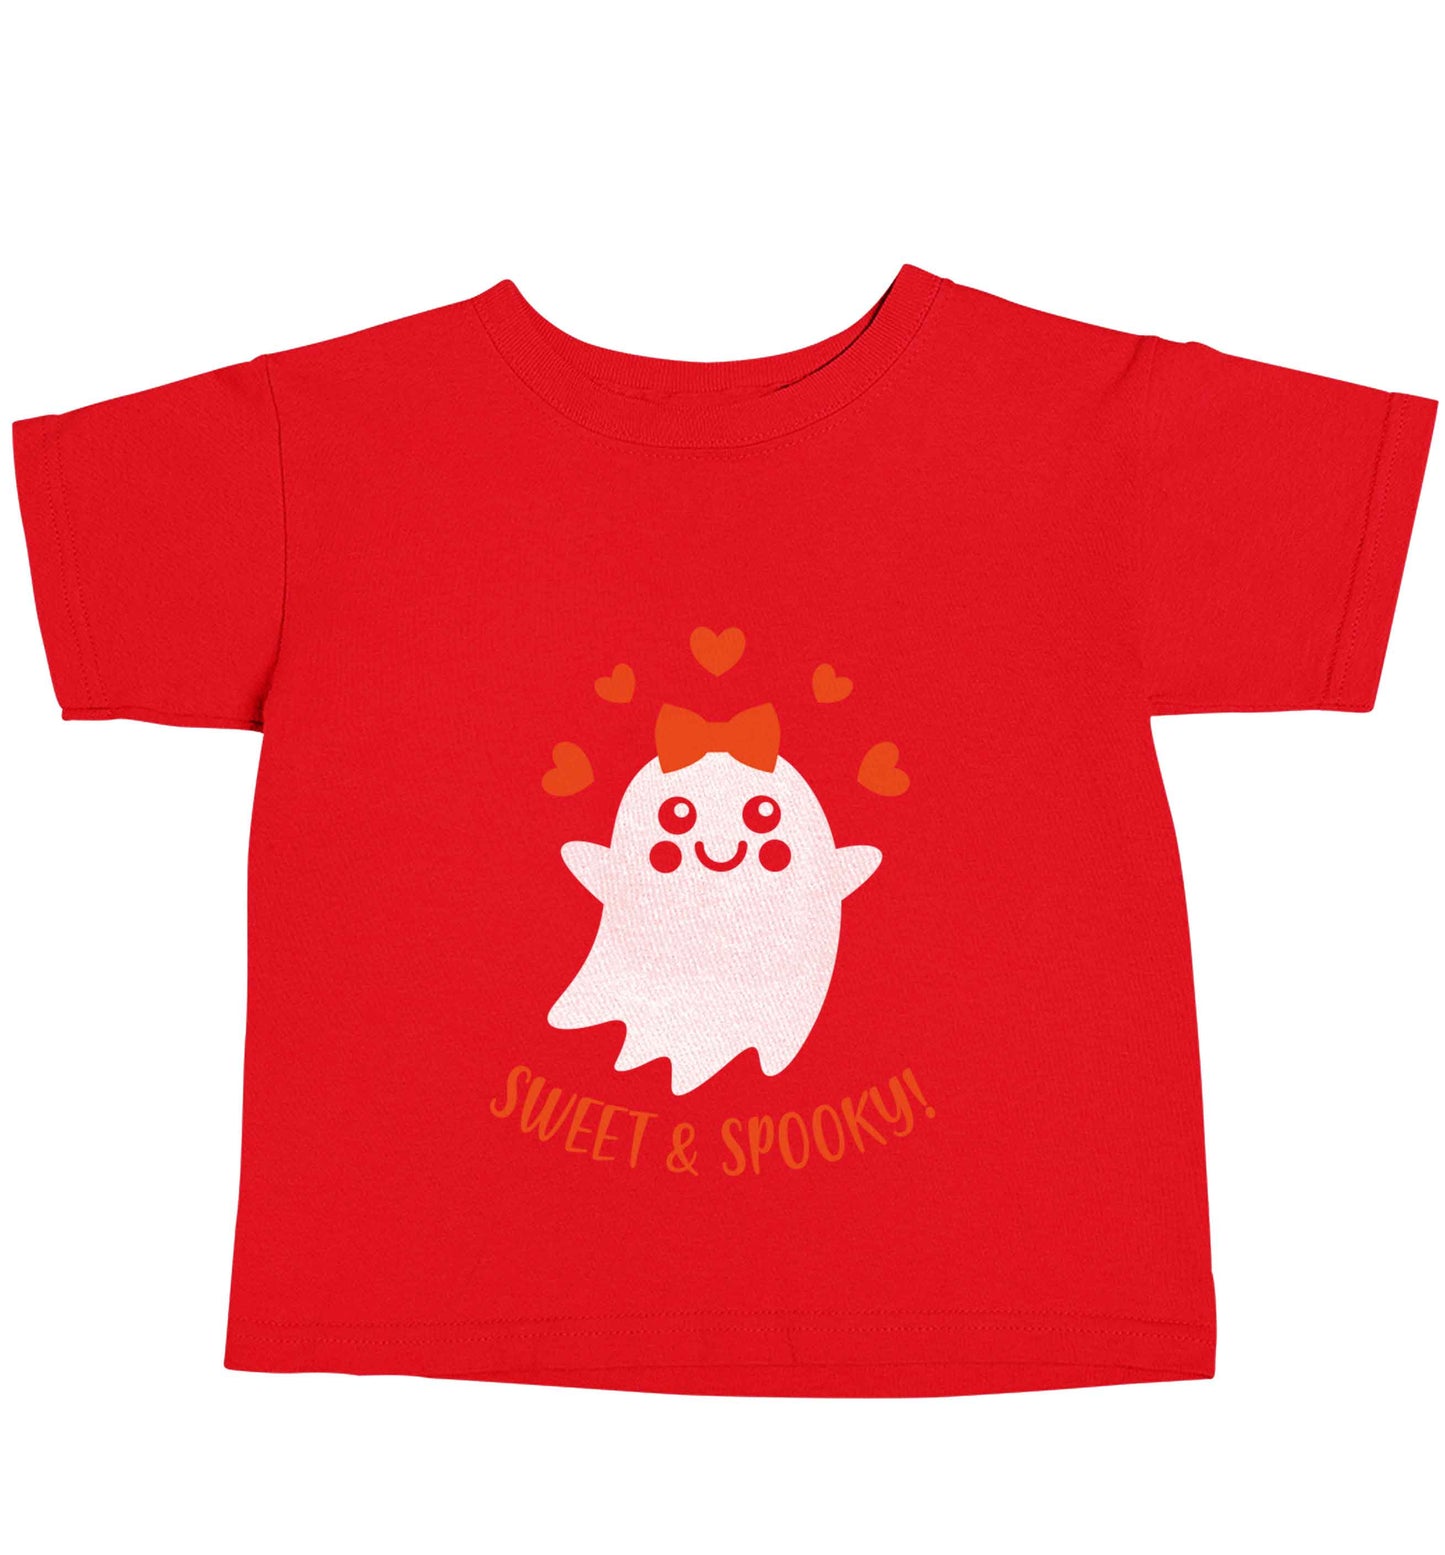 Sweet and spooky red baby toddler Tshirt 2 Years